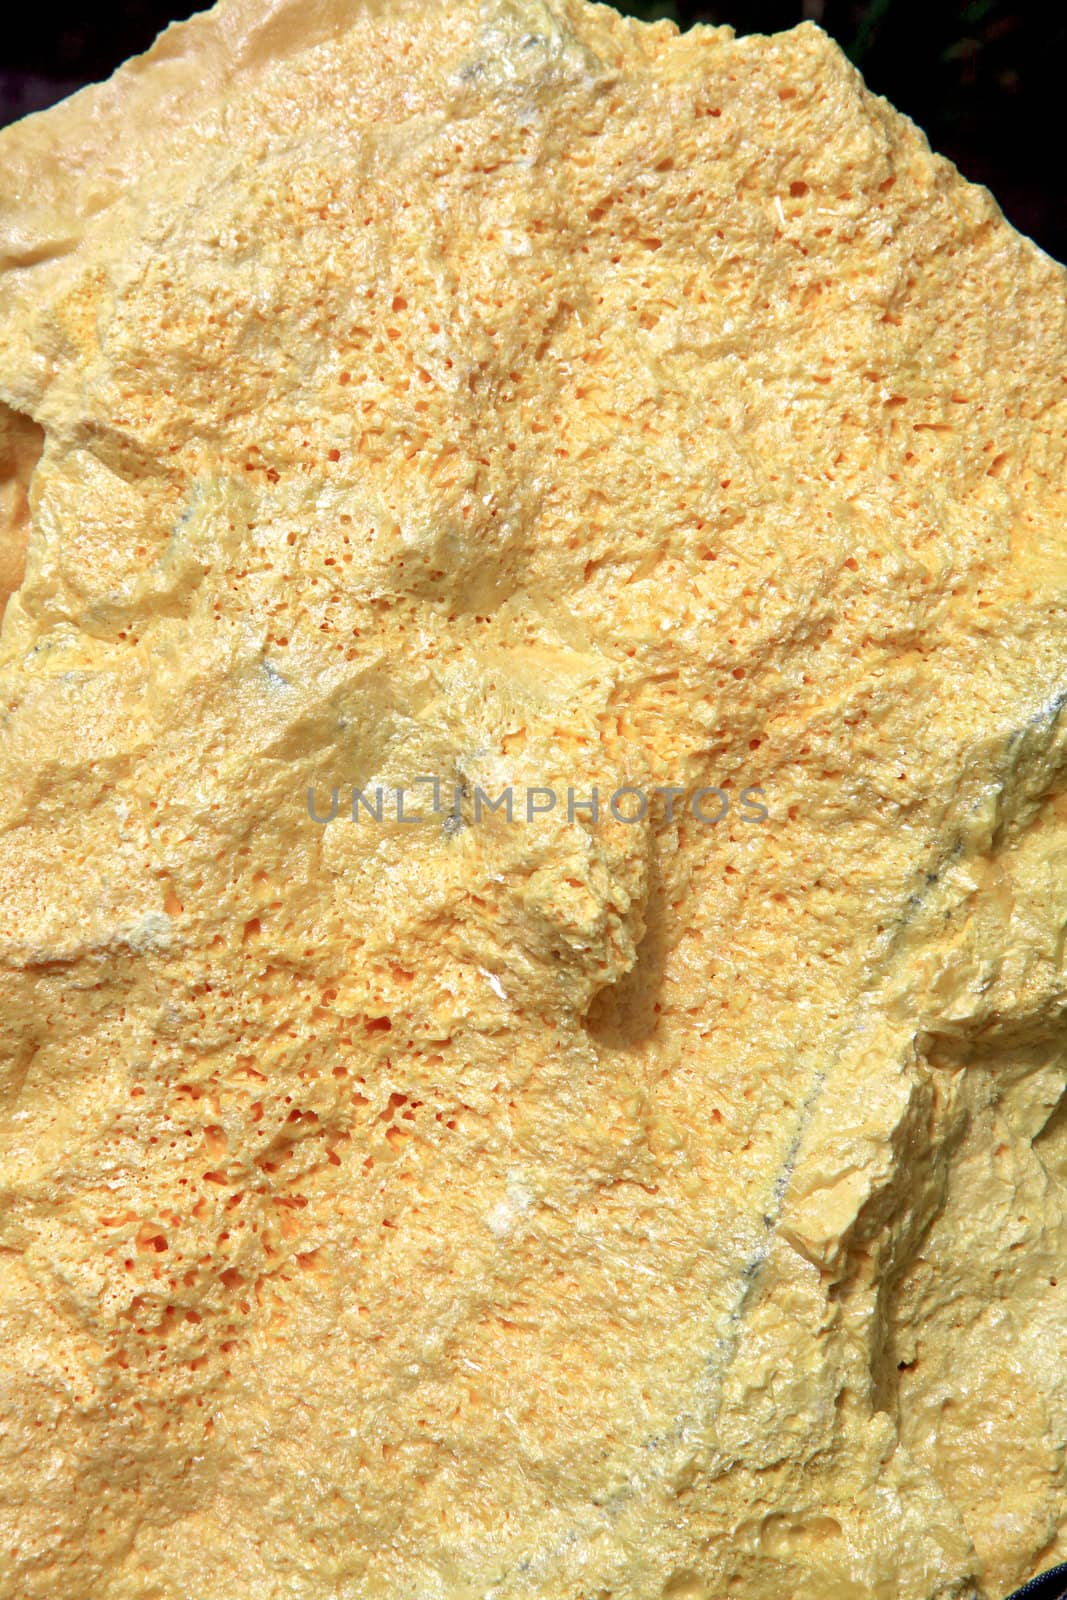 Sulfur Texture from Galapagos Volcanic Crater using as background